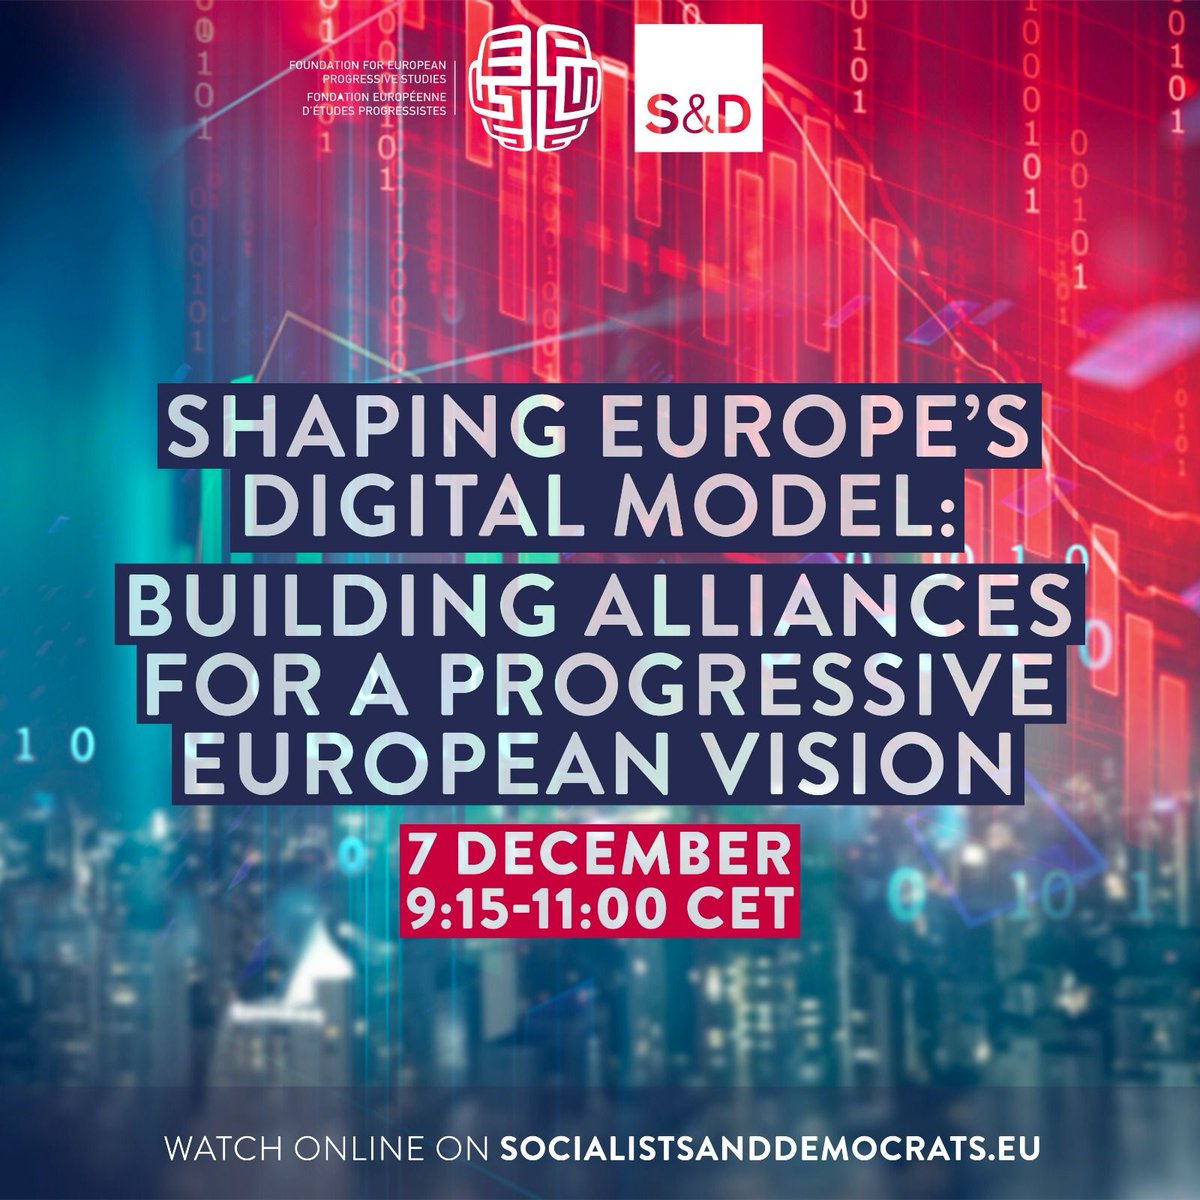 We must curb the power & influence Big Tech has on our lives. ✊ For years we have been fighting to have the right laws for people to benefit from digitalisation. Challenges still lay ahead. This Thursday we'll discuss with MEPs and experts. Live on socialistsanddemocrats.eu